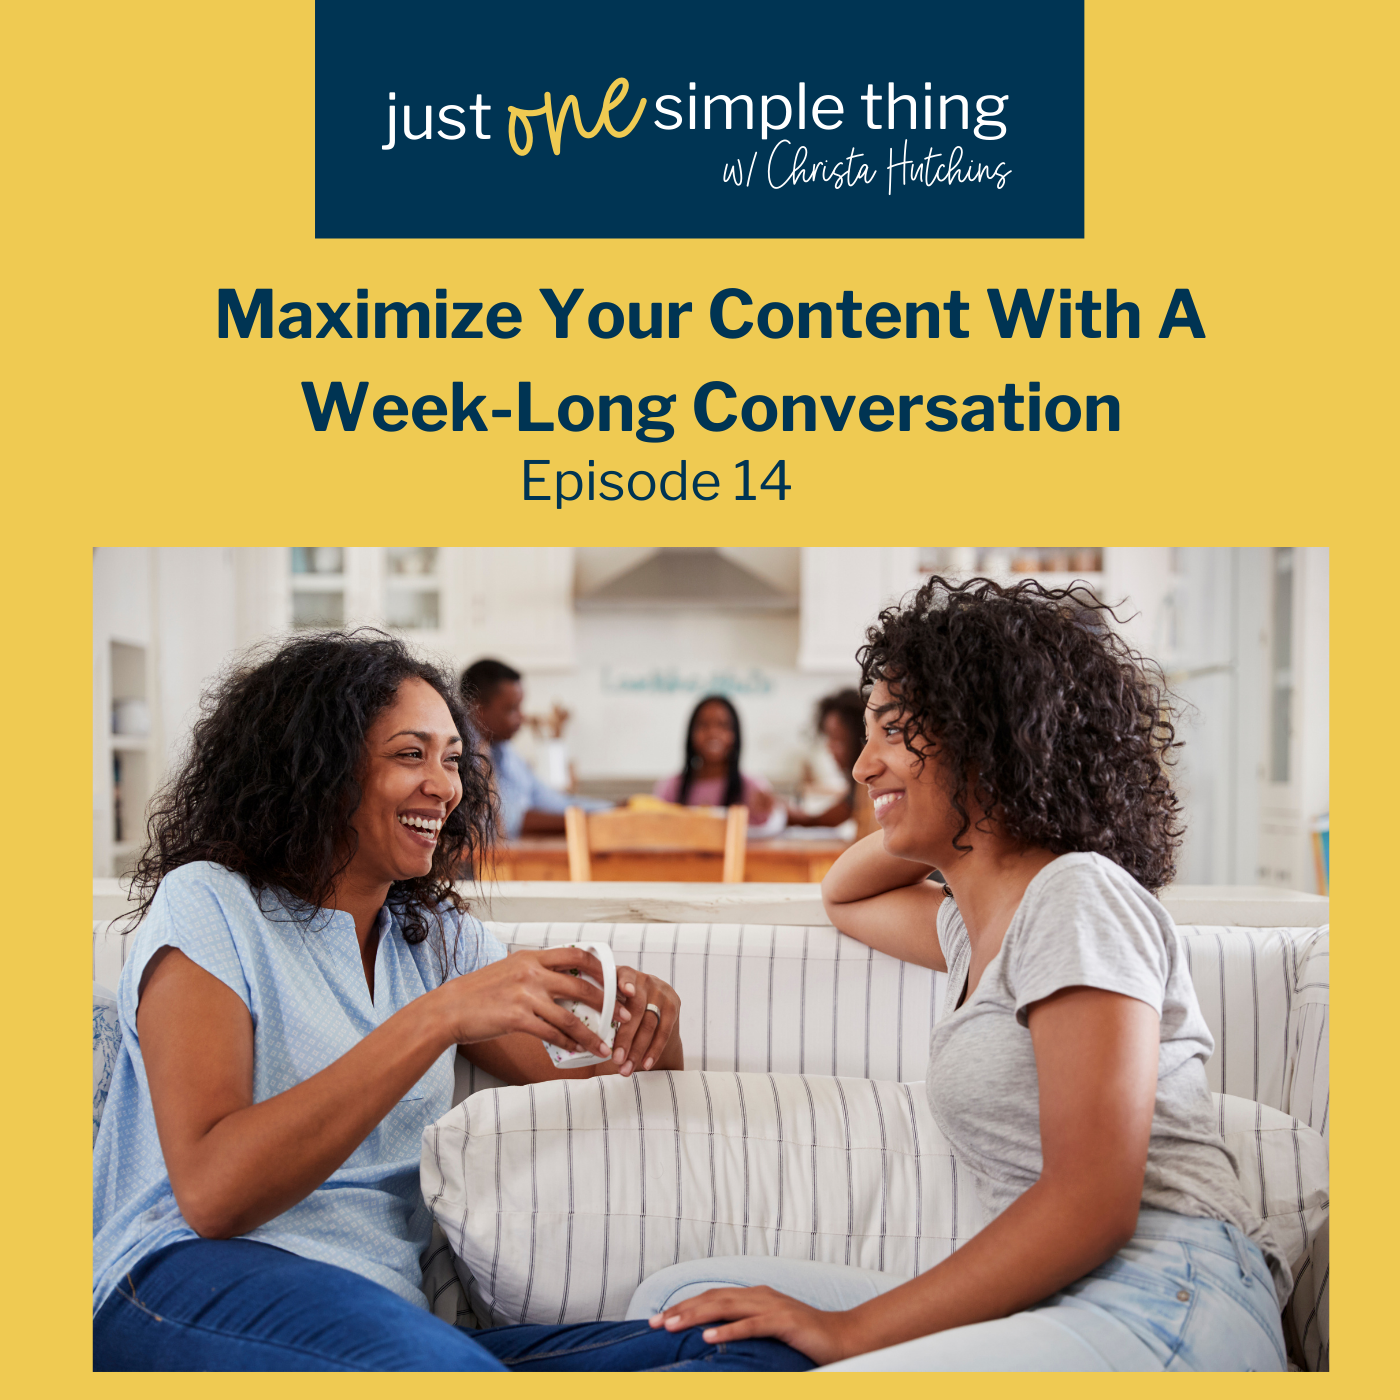 Maximize Your Content with a Week-Long Conversation